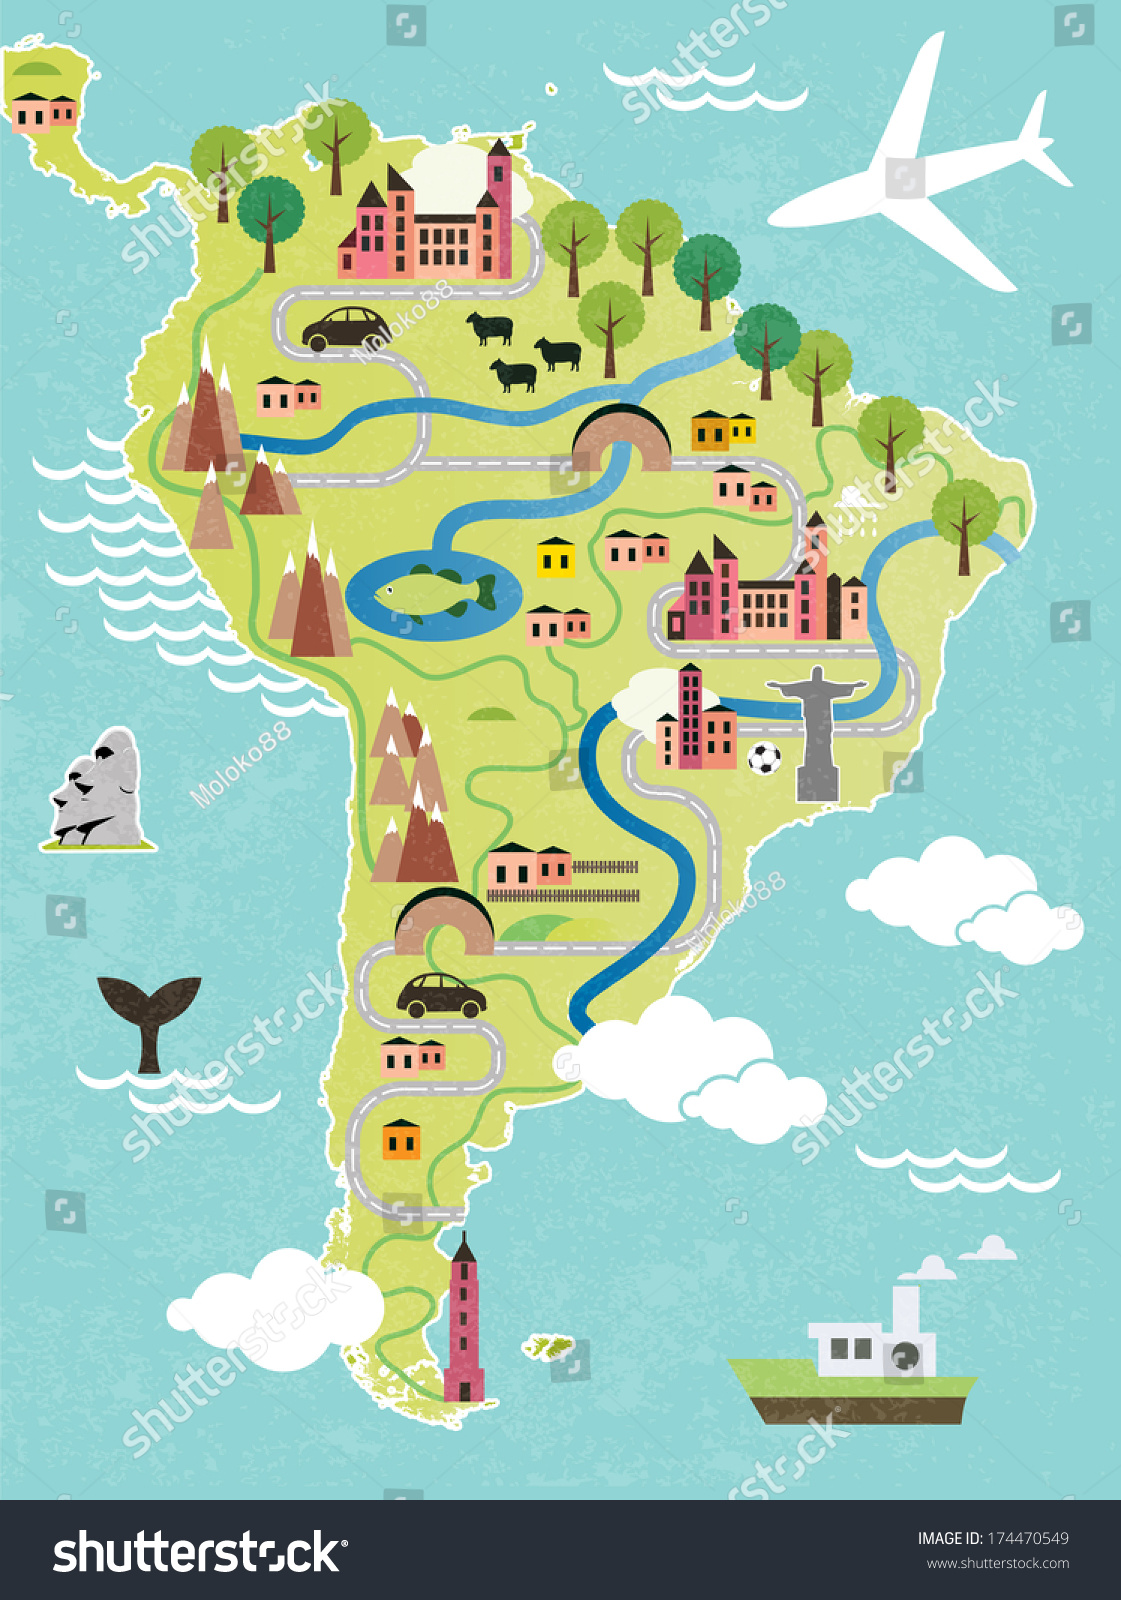 clipart map south america - photo #41